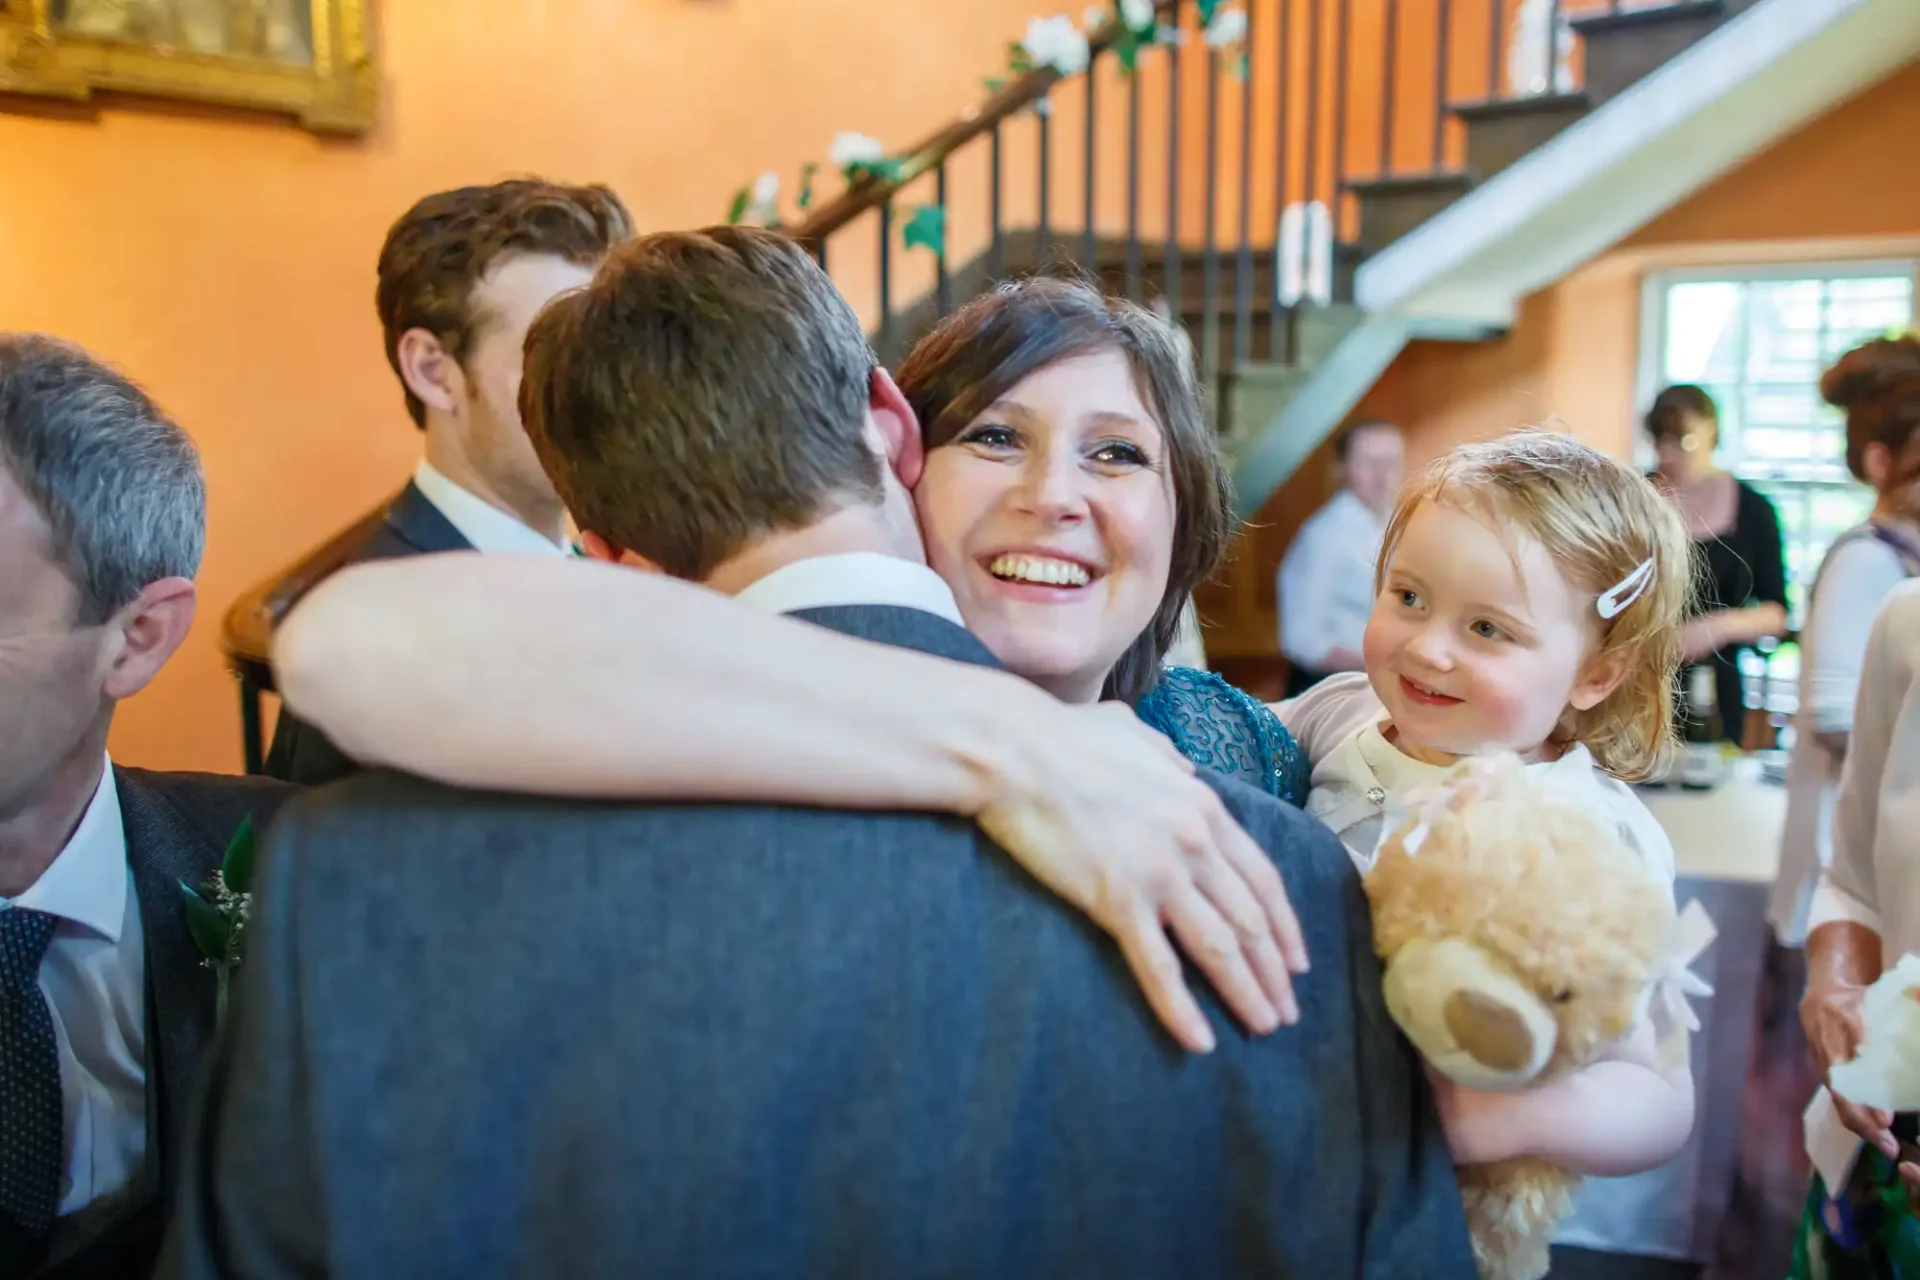 A joyful woman with short brown hair hugs a man at a wedding, holding a little girl with a teddy bear; other guests appear in the background.